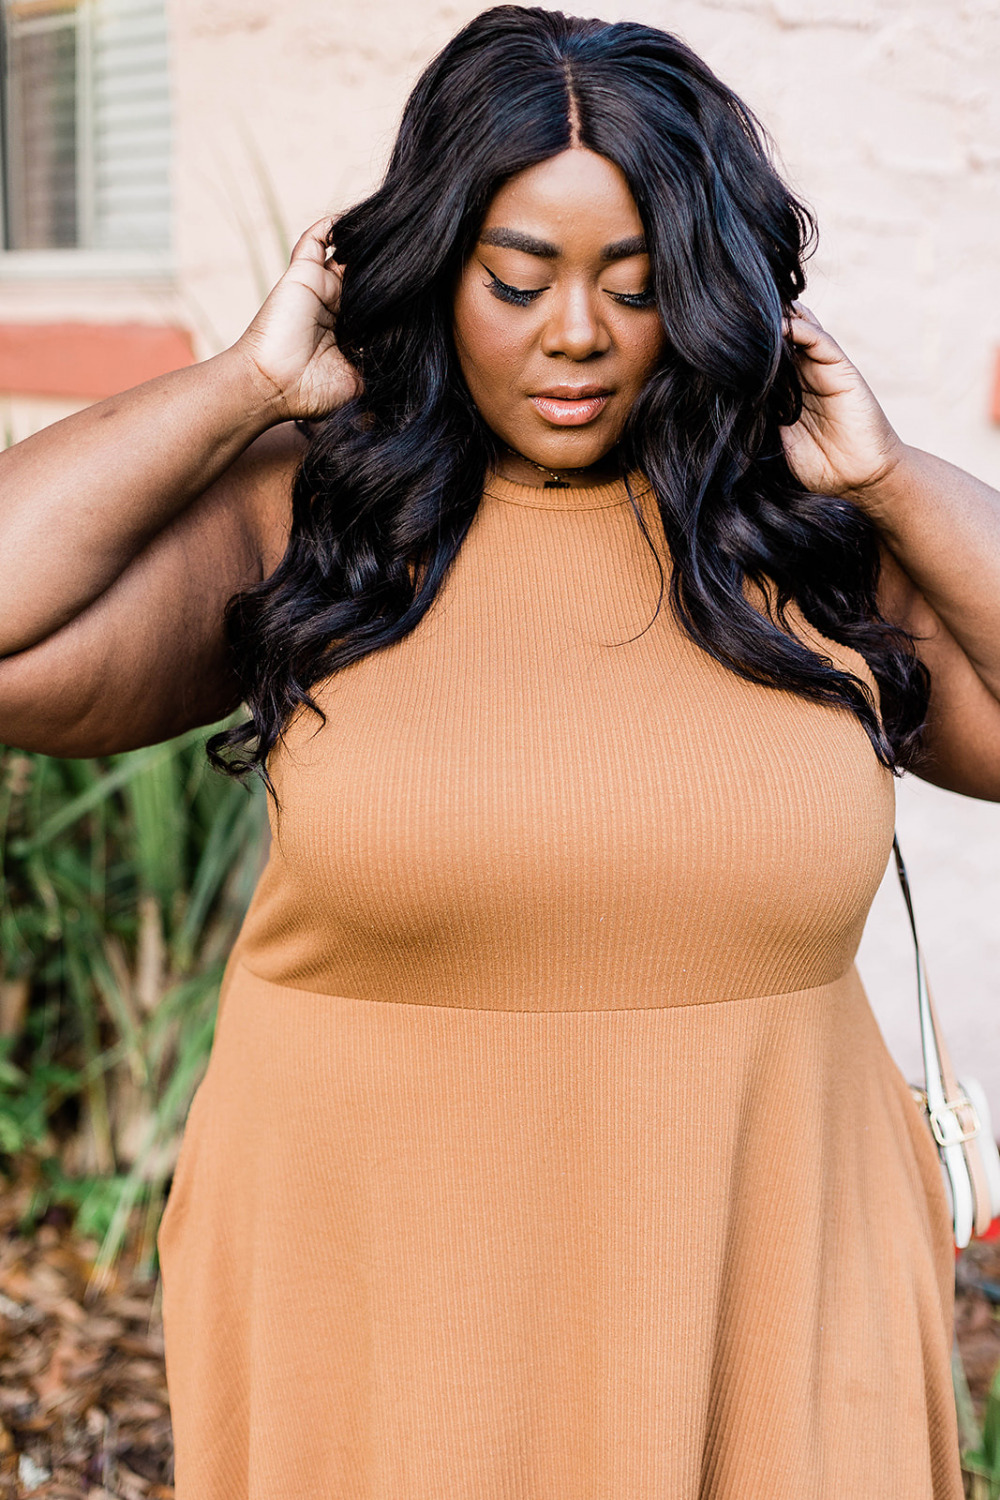 Nordstrom Half-Yearly Sale, BP. Rib Knit Racerback Dress, Plus Size Fashion, Thamarr Musings of a Curvy Lady